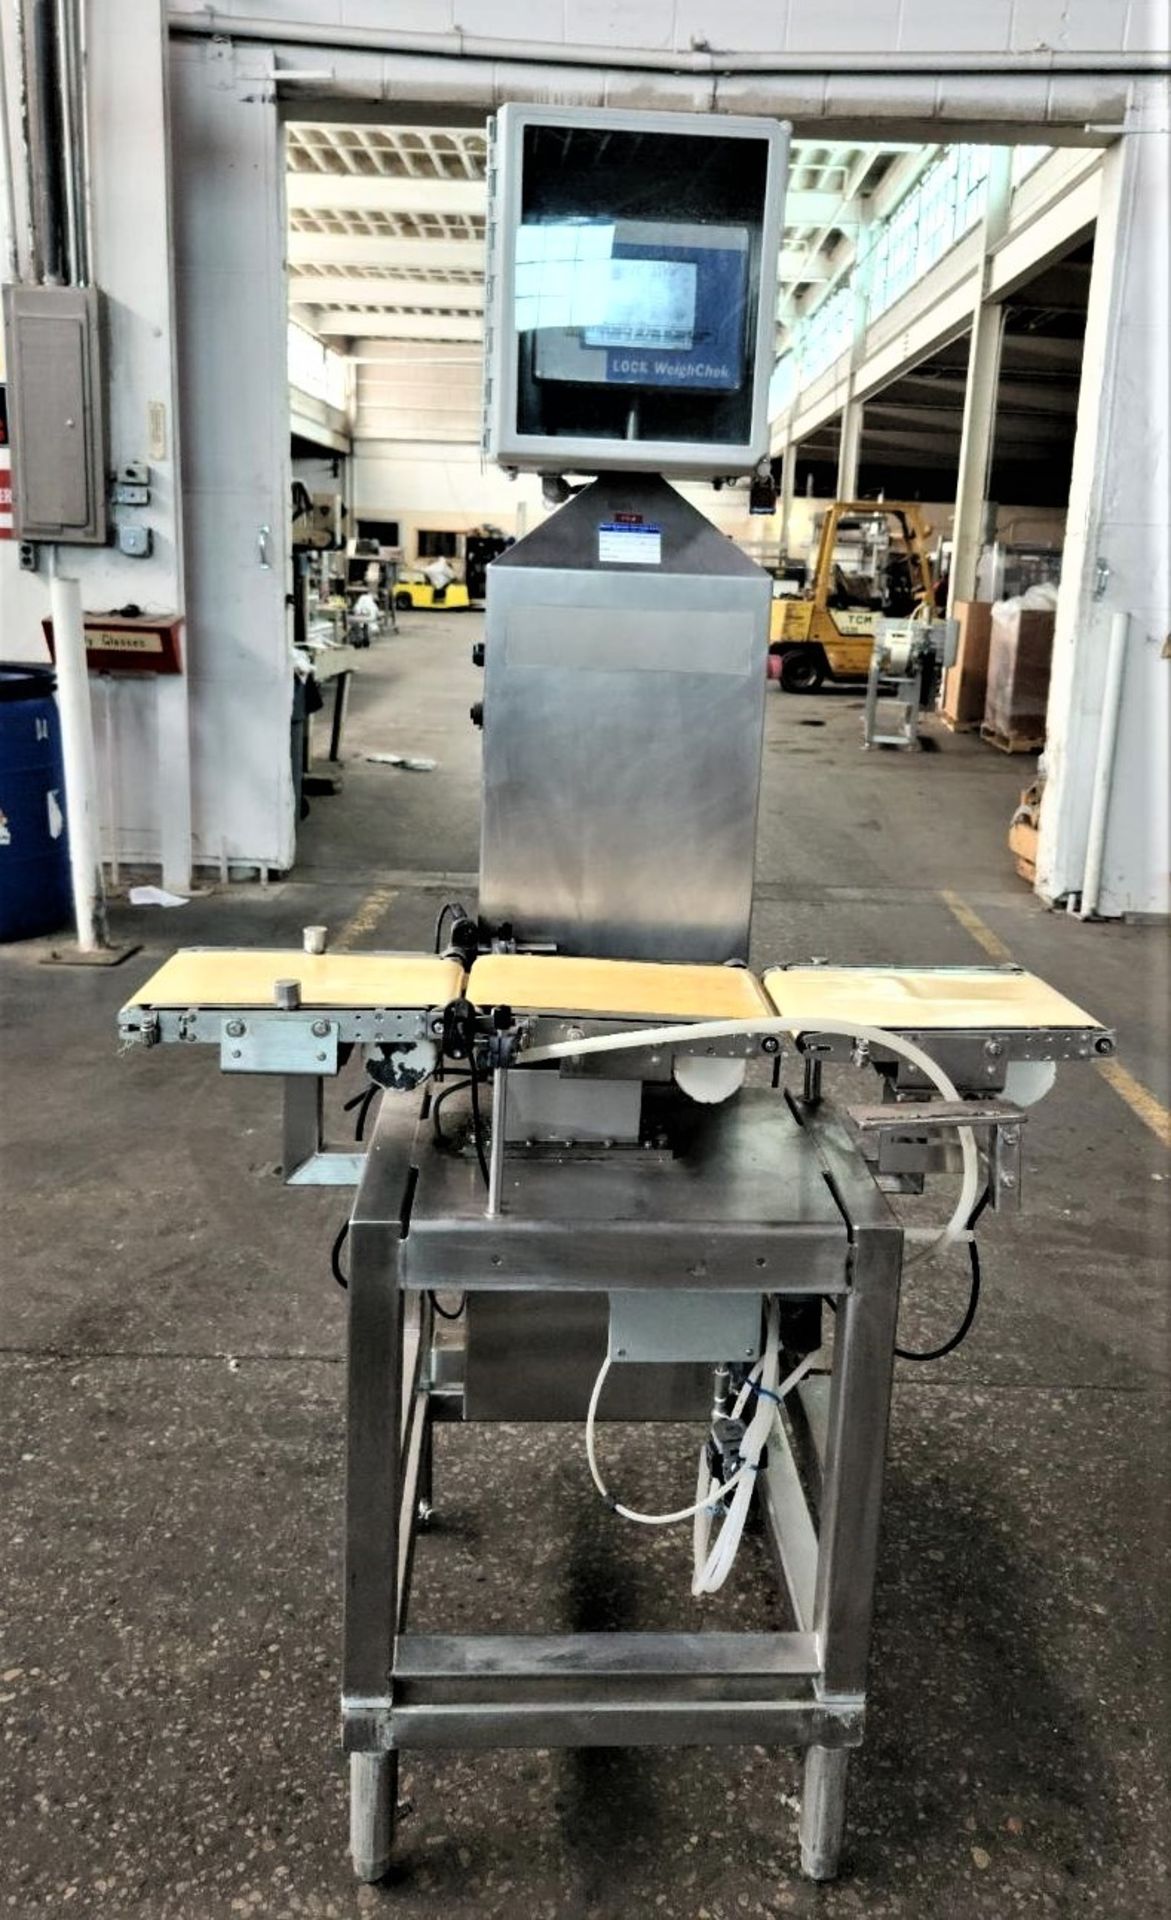 Lock WeighCheck S/S Checkweigher, Model WeighChek, Last Calibrated in 2021 with 12" Wide Belt,